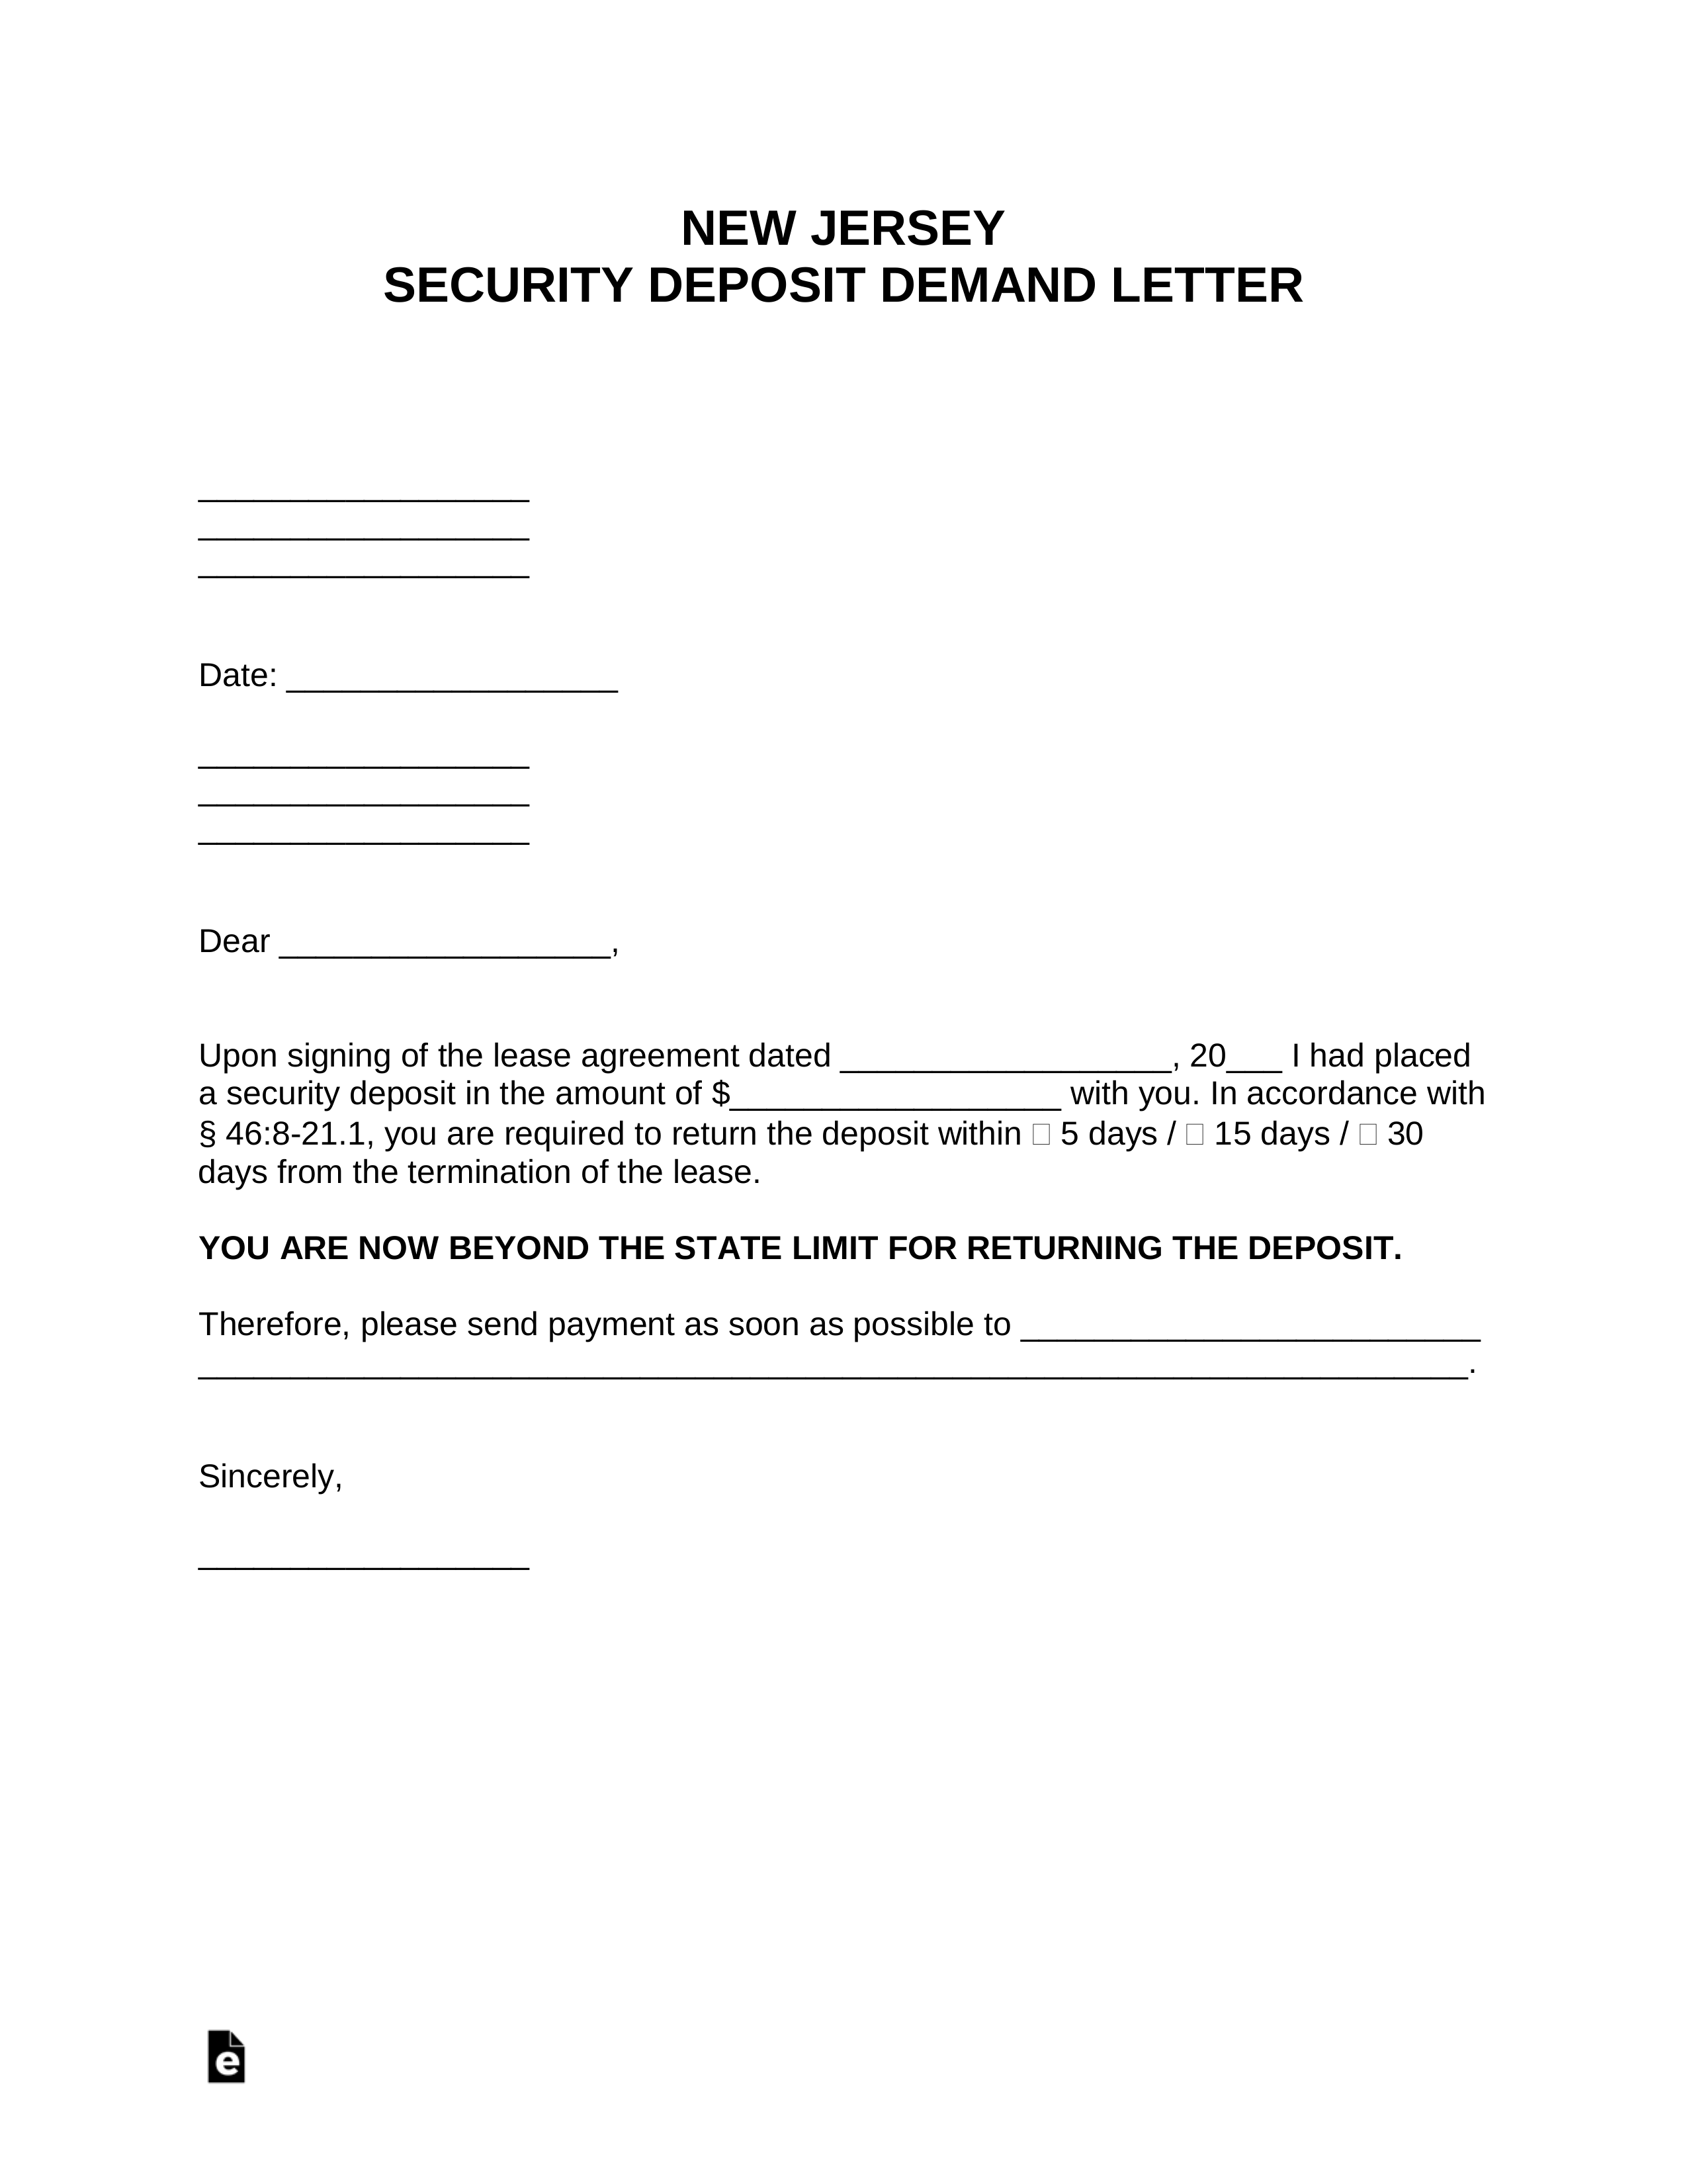 Free New Jersey Security Deposit Demand Letter - PDF  Word – eForms Regarding Request For Return Of Security Deposit Form Within Request For Return Of Security Deposit Form